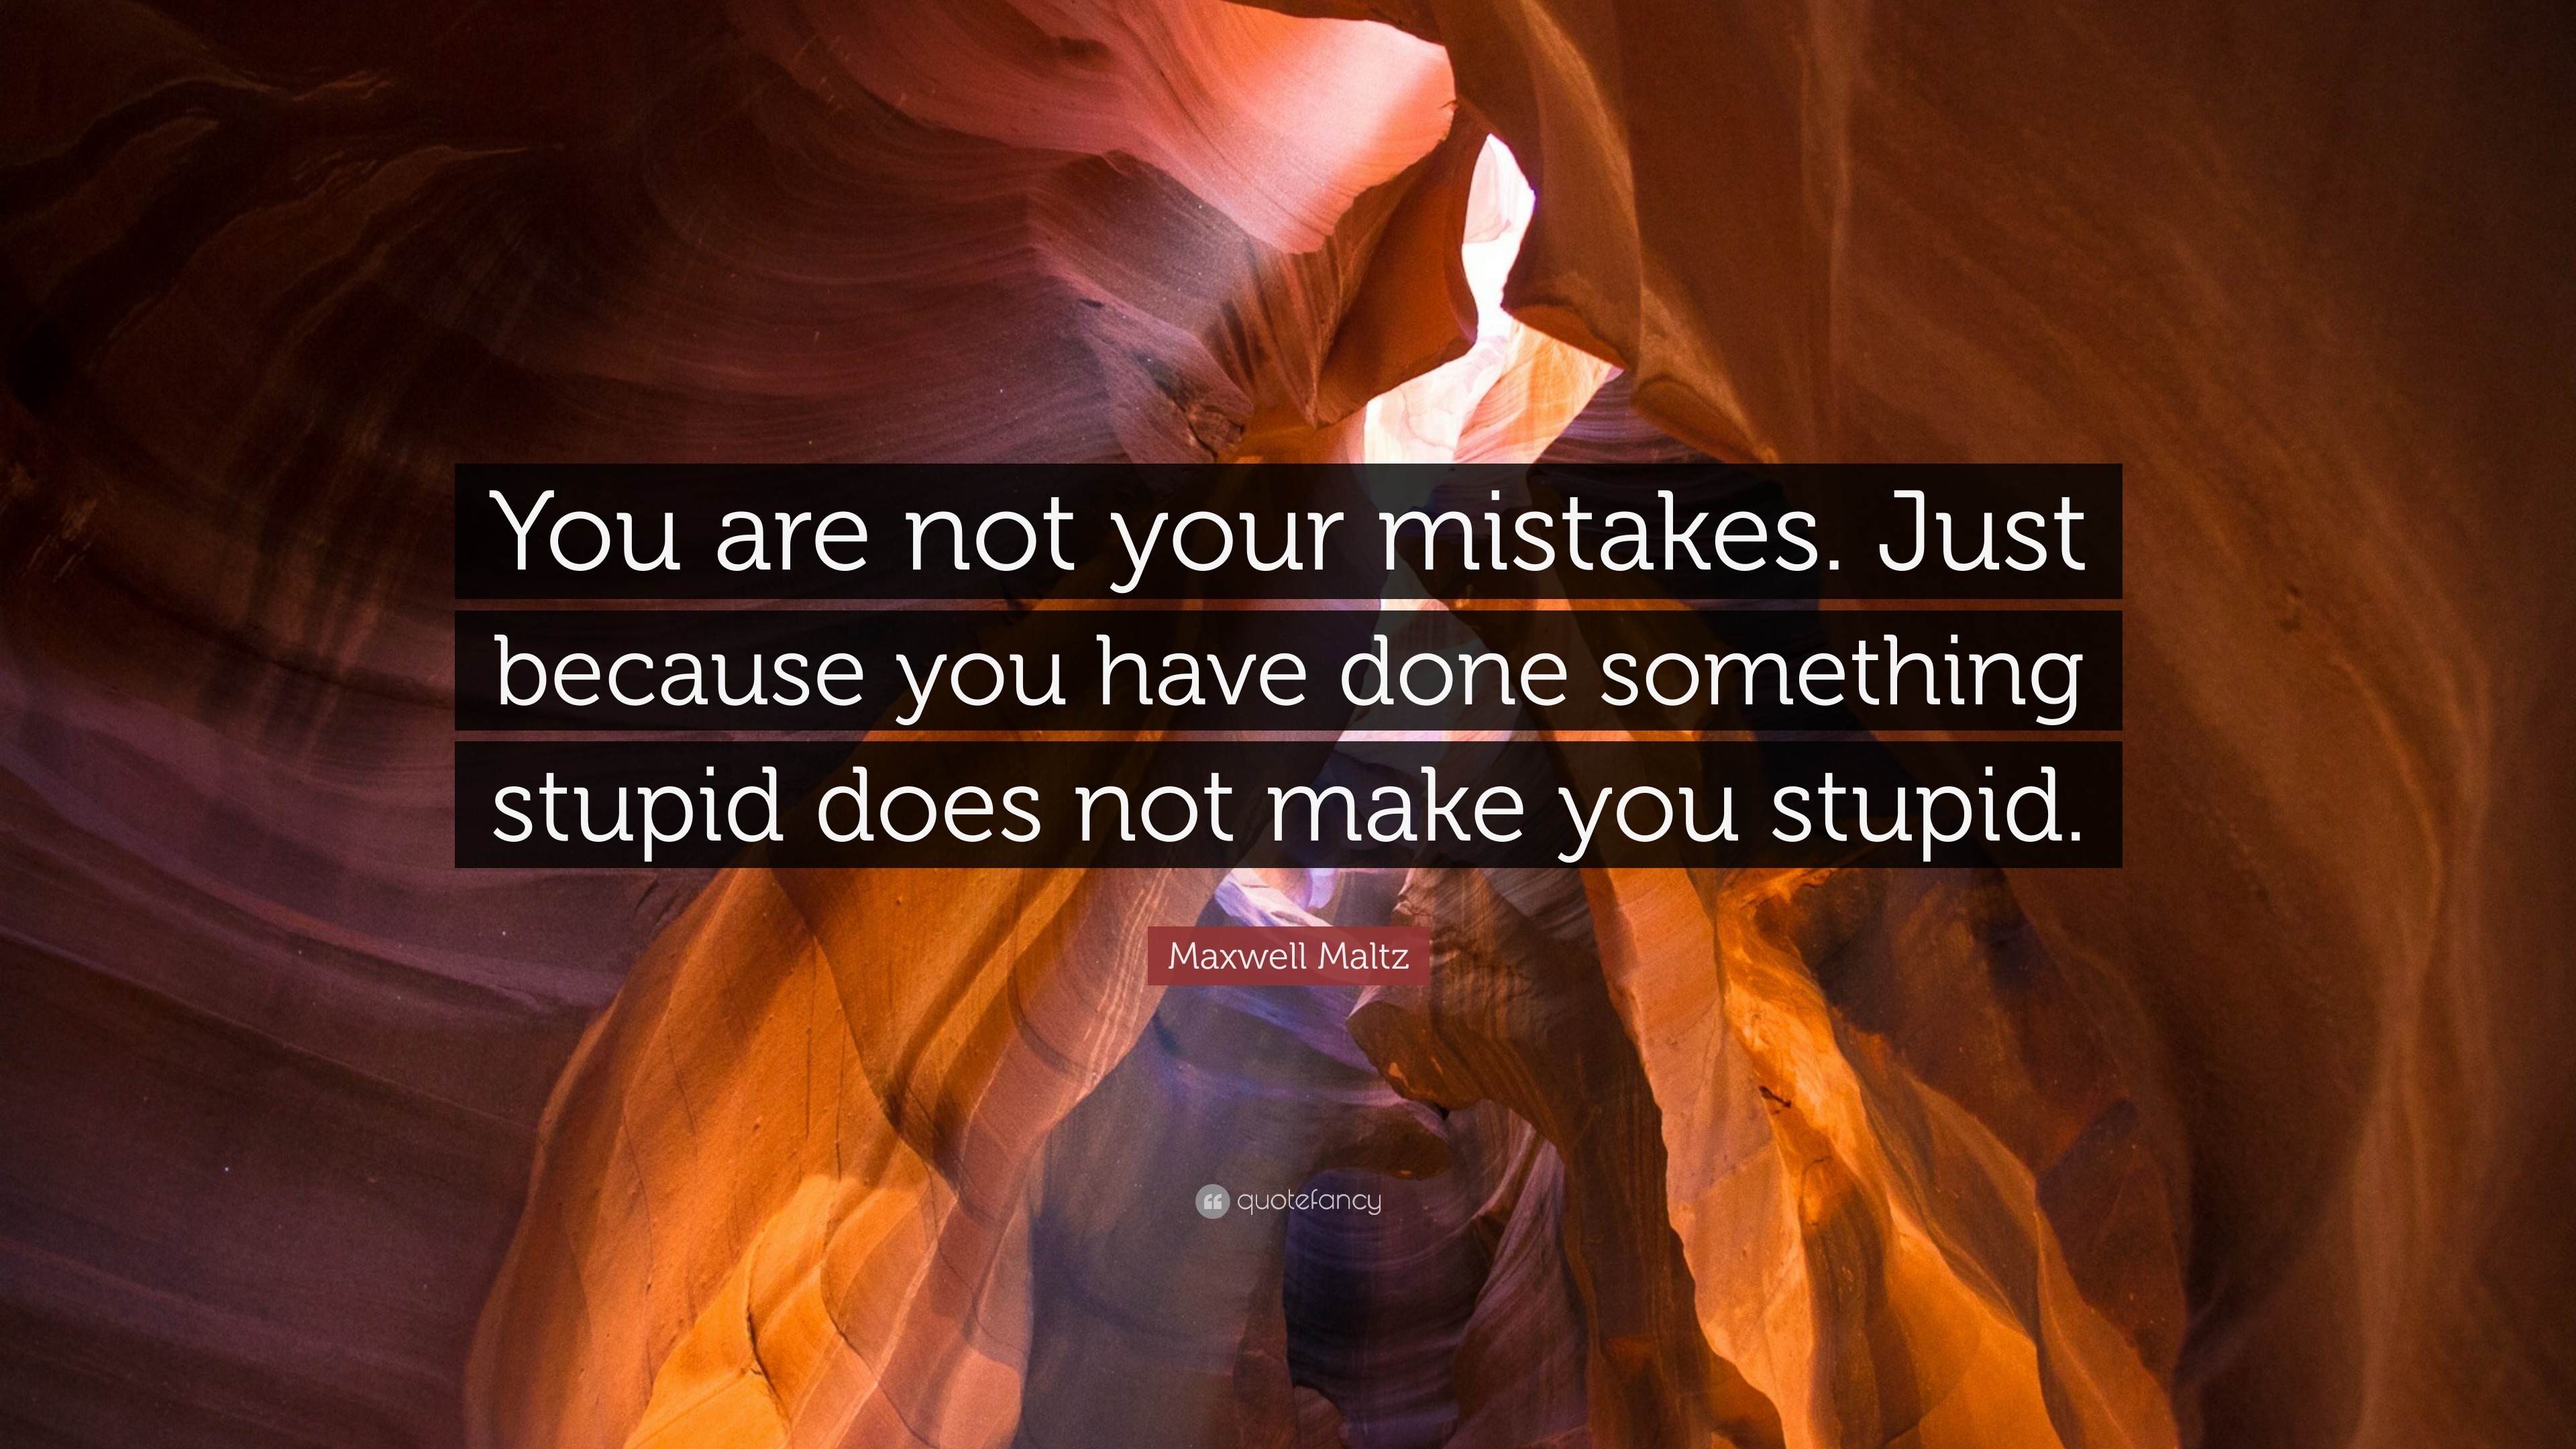 Maxwell Maltz Quote You Are Not Your Mistakes Just Because You Have Done Something Stupid Does